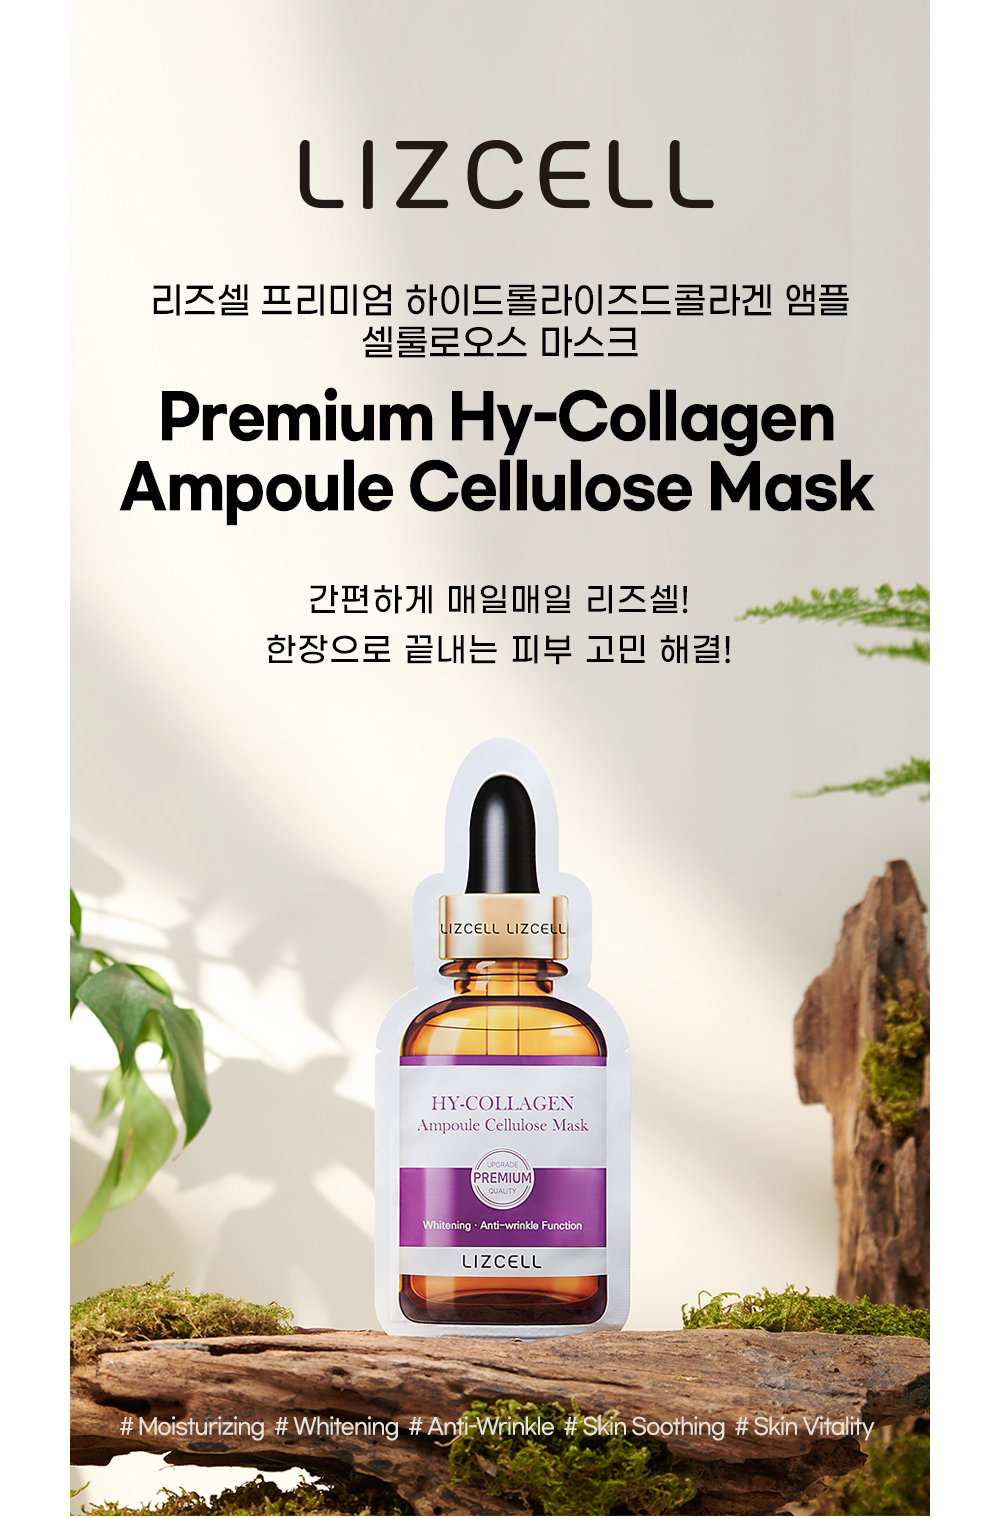 Mặt nạ Lizcell Premium Hydrolyzed Collagen Ampoule Cellulose Mask